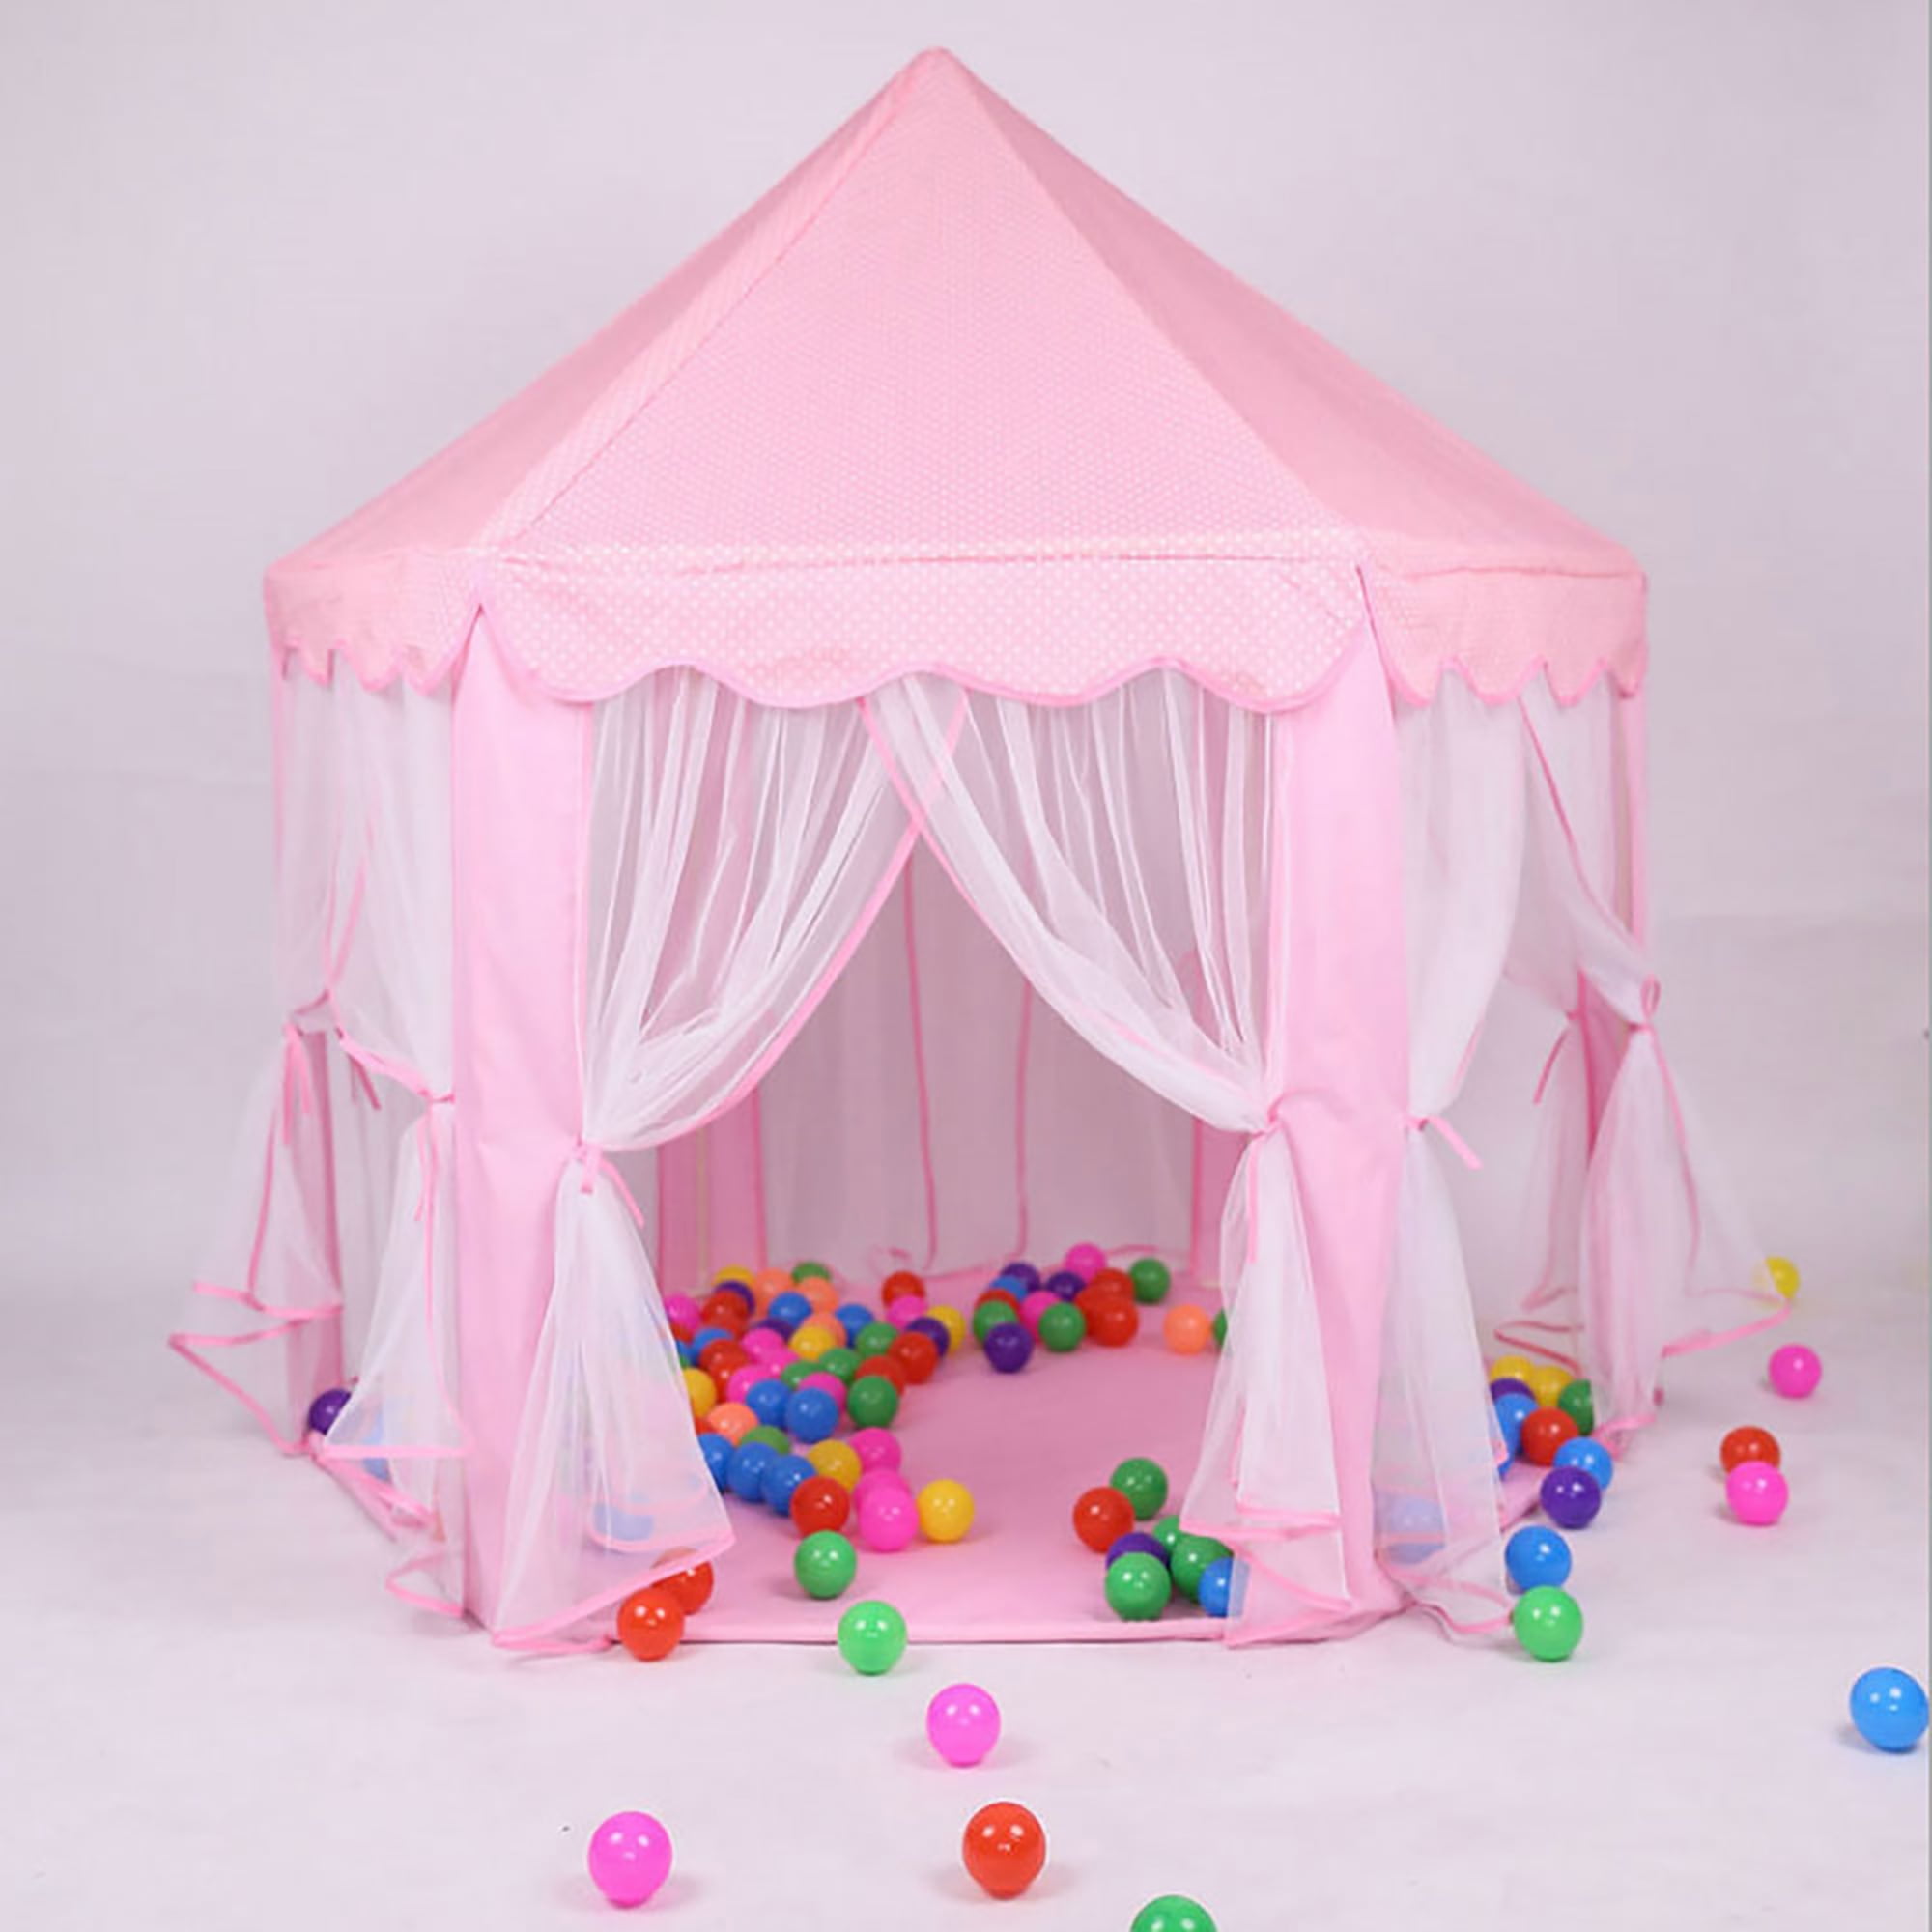 Details about   Bastex Princess Castle Play House Large Indoor/Outdoor Pink Girls Play Tent 